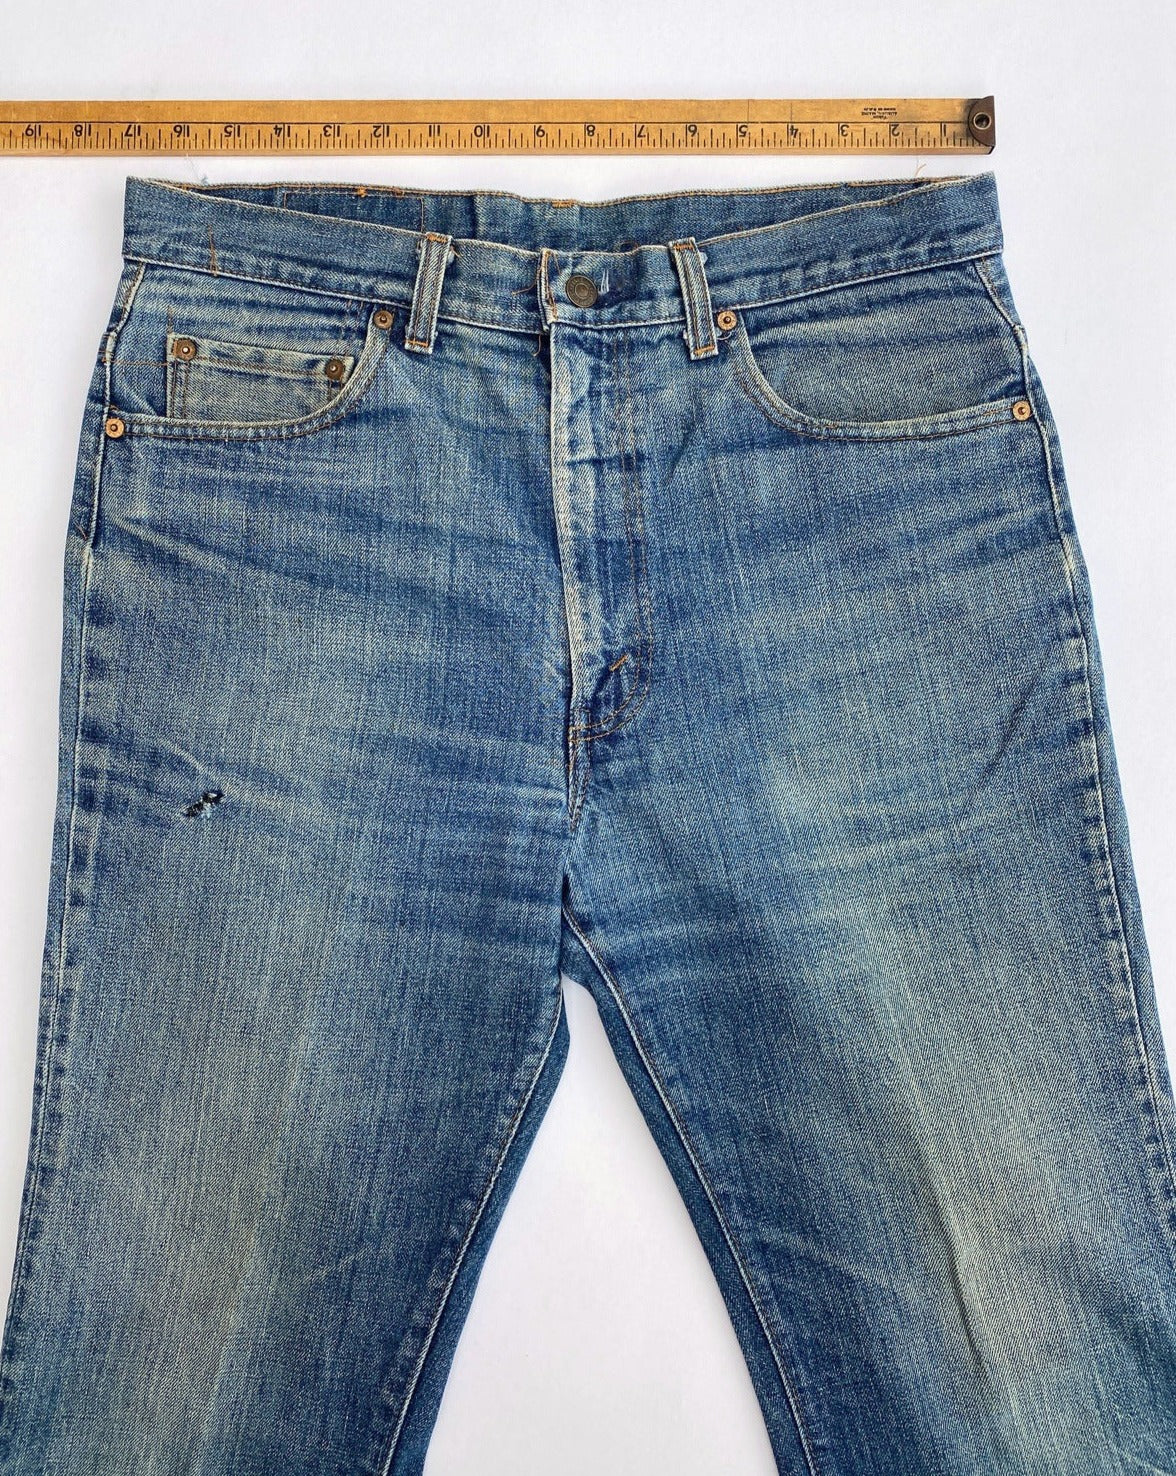 Levi's Vintage Flare Jeans in Blue